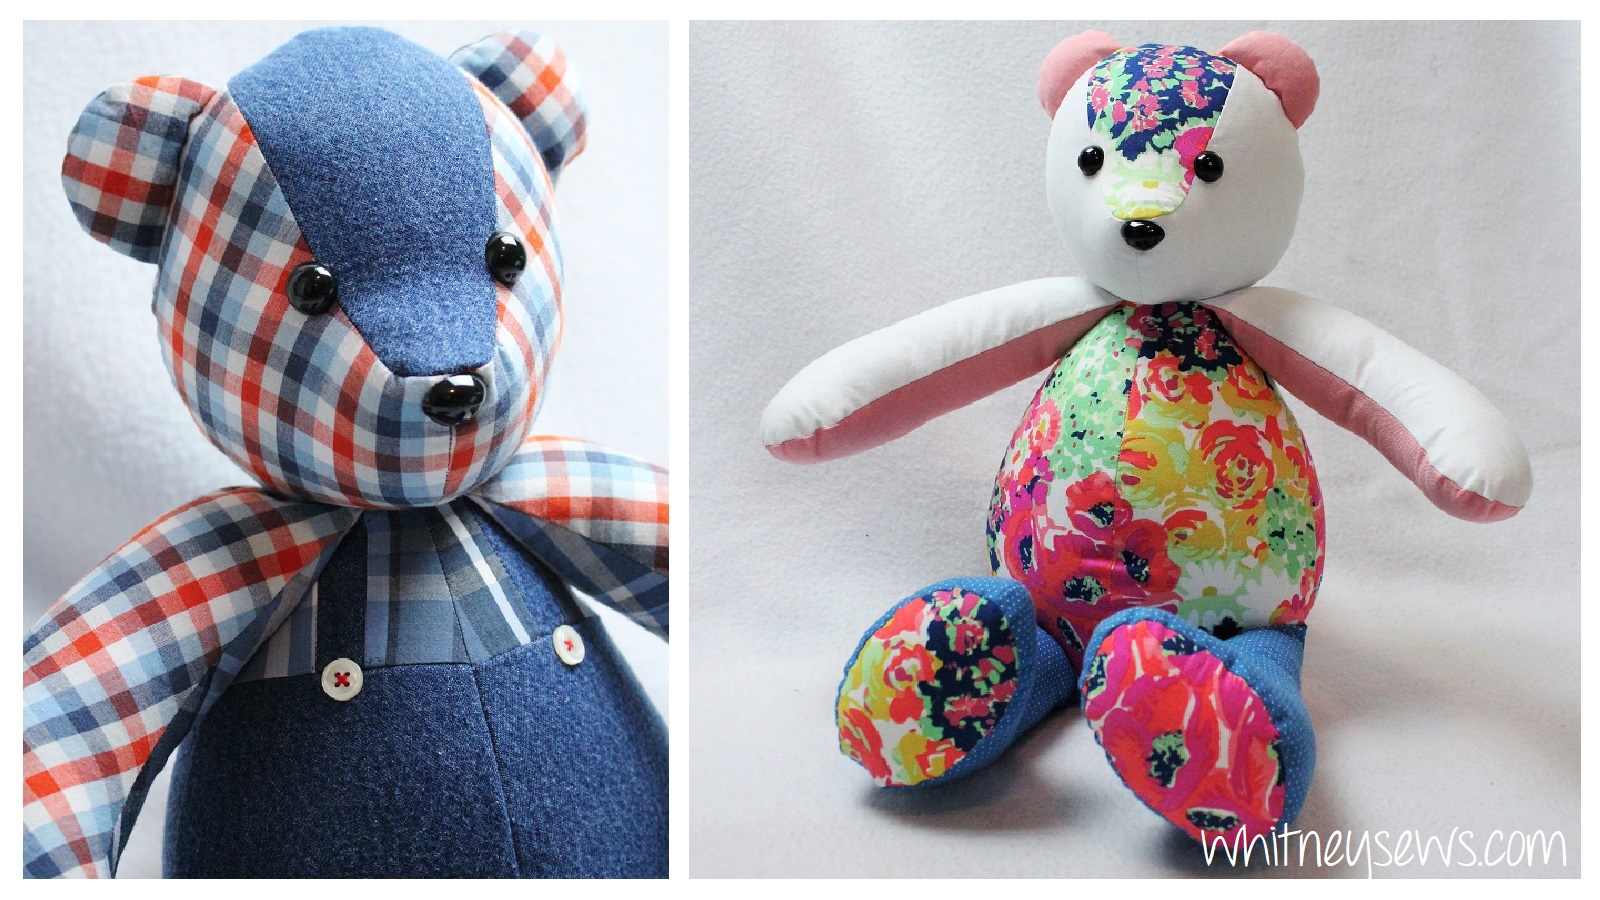 Memory Bear Sewing Series Archives - Whitney Sews